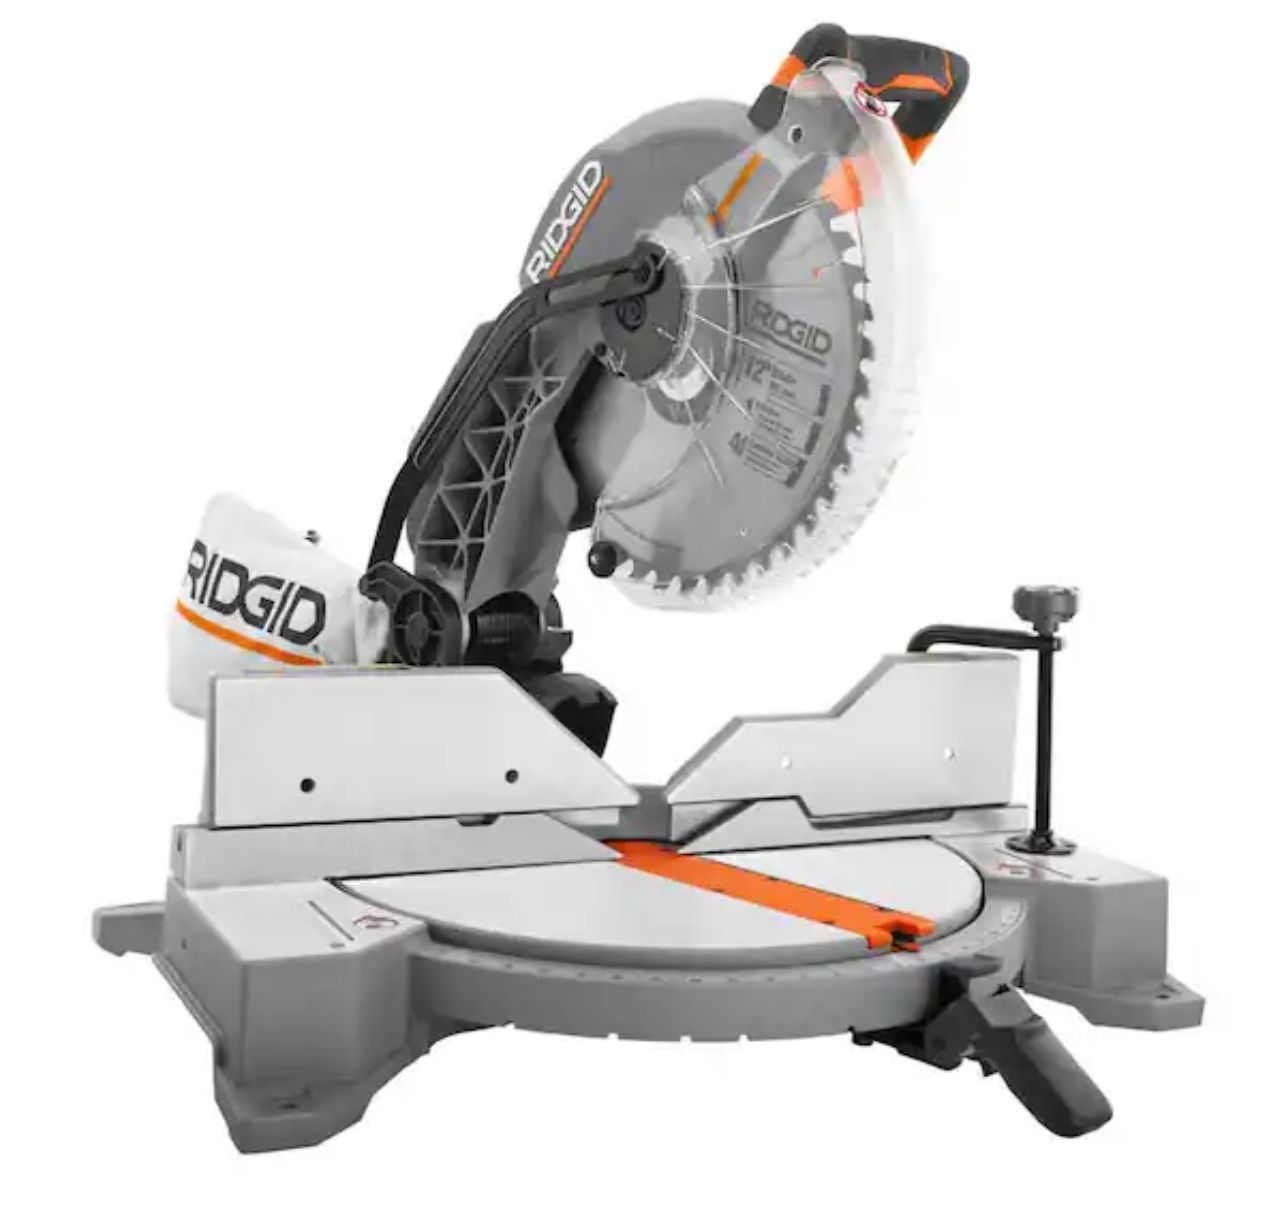 RIGID 15 Amp Corded 12 in. Dual Bevel Miter Saw with LED Cutline Indicator